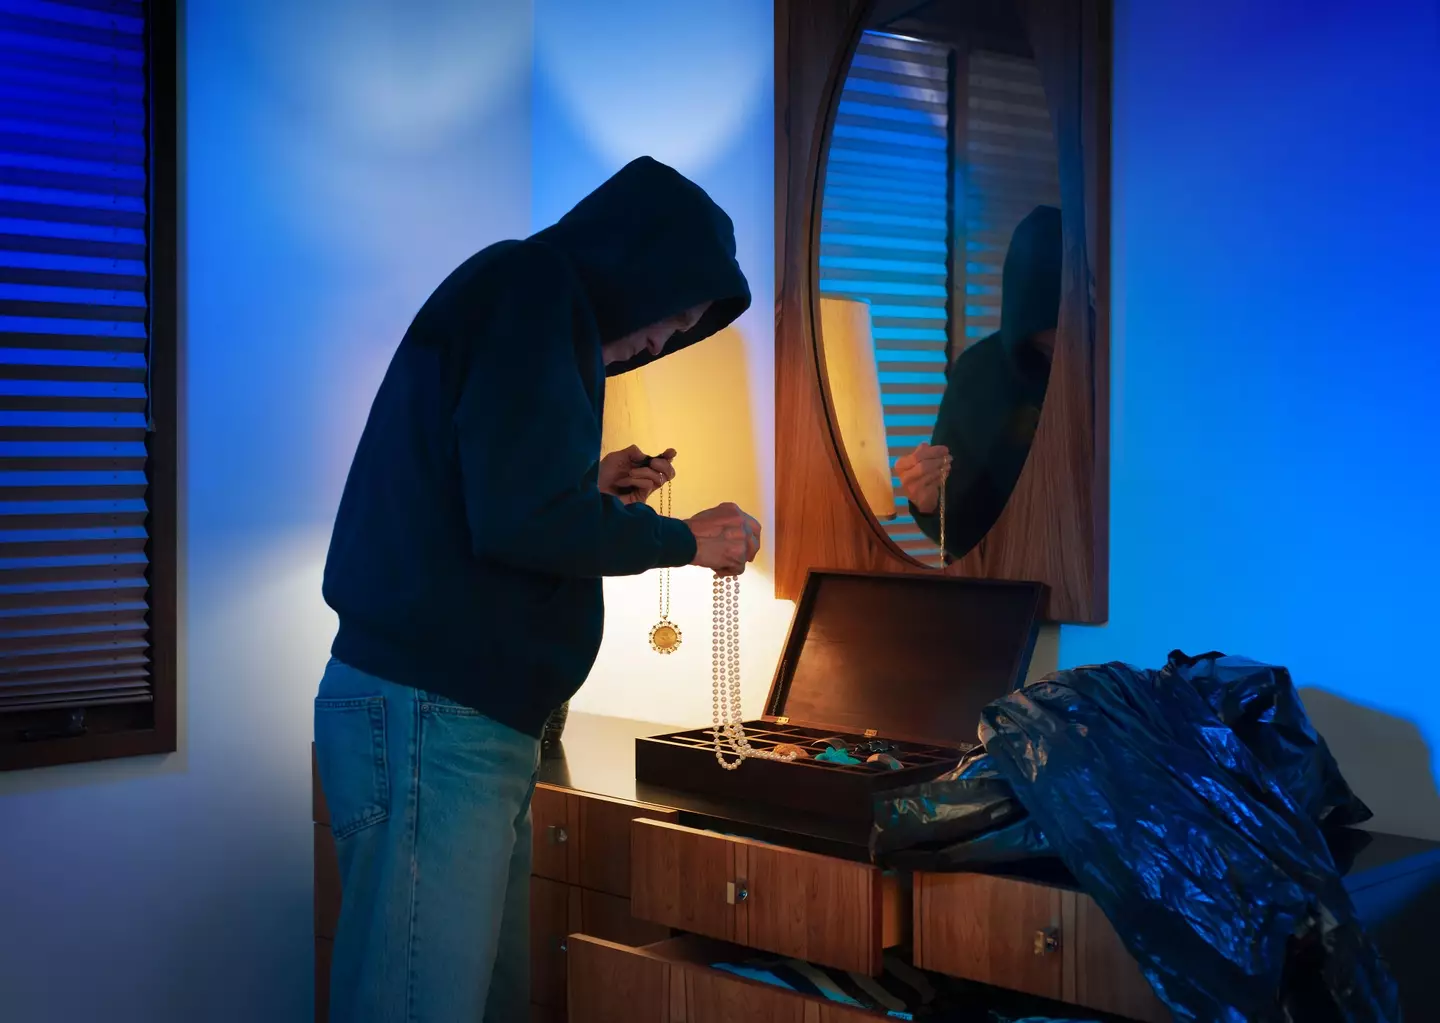 He has a few tips for those who want to minimise the chances of being burgled (